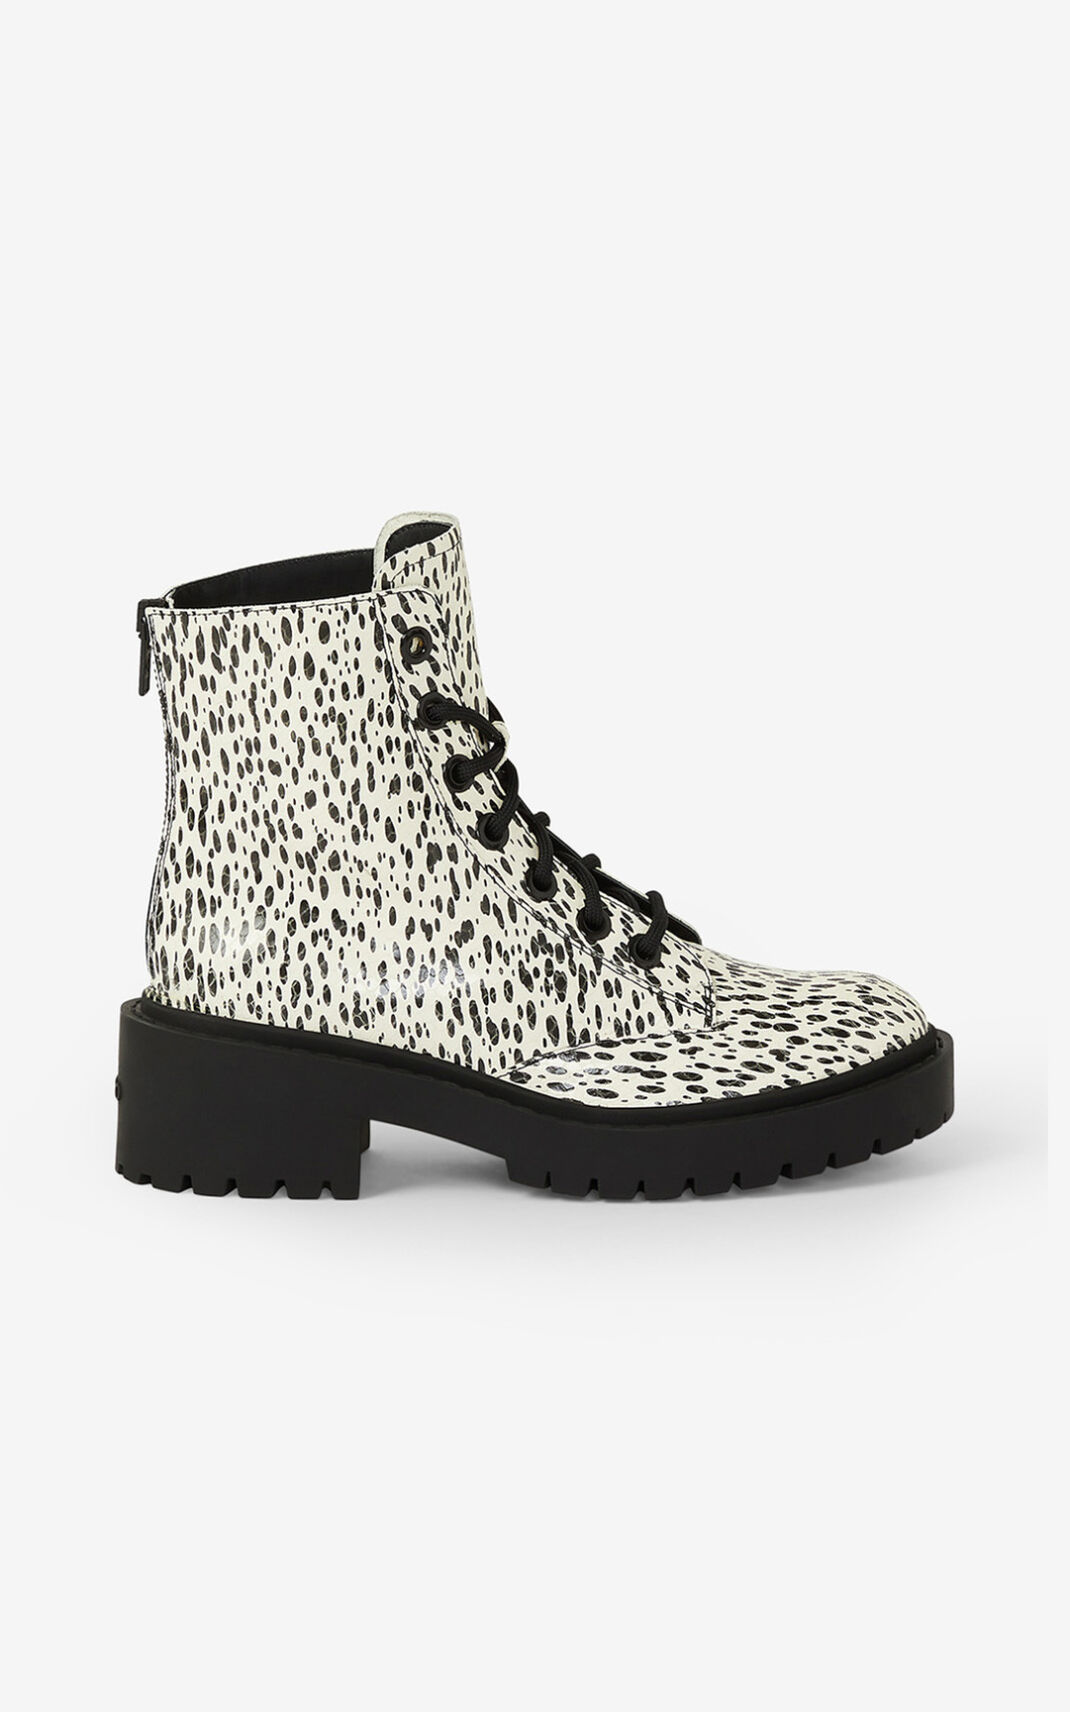 Kenzo Lace up Pike Leopard レザー ankle ブーツ レディース 白 - ZGQHFA587